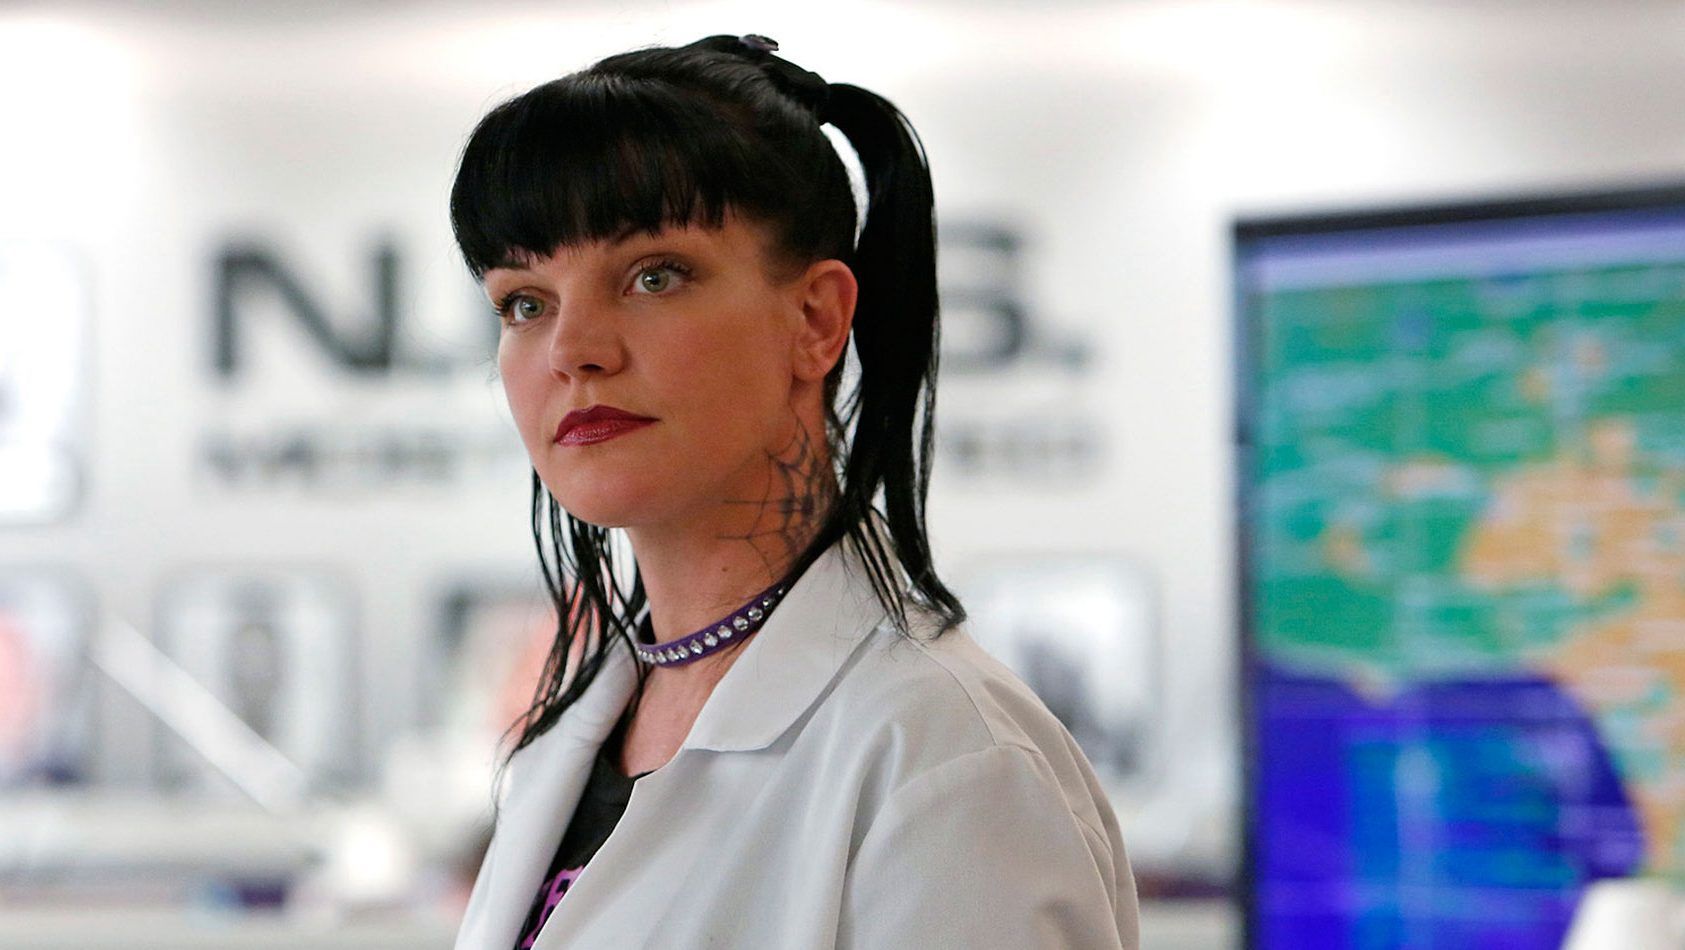 A year ago, Pauley Perrette woke up with no feeling on the right side of her body. (Photo by Cliff Lipson/CBS via Getty Images)